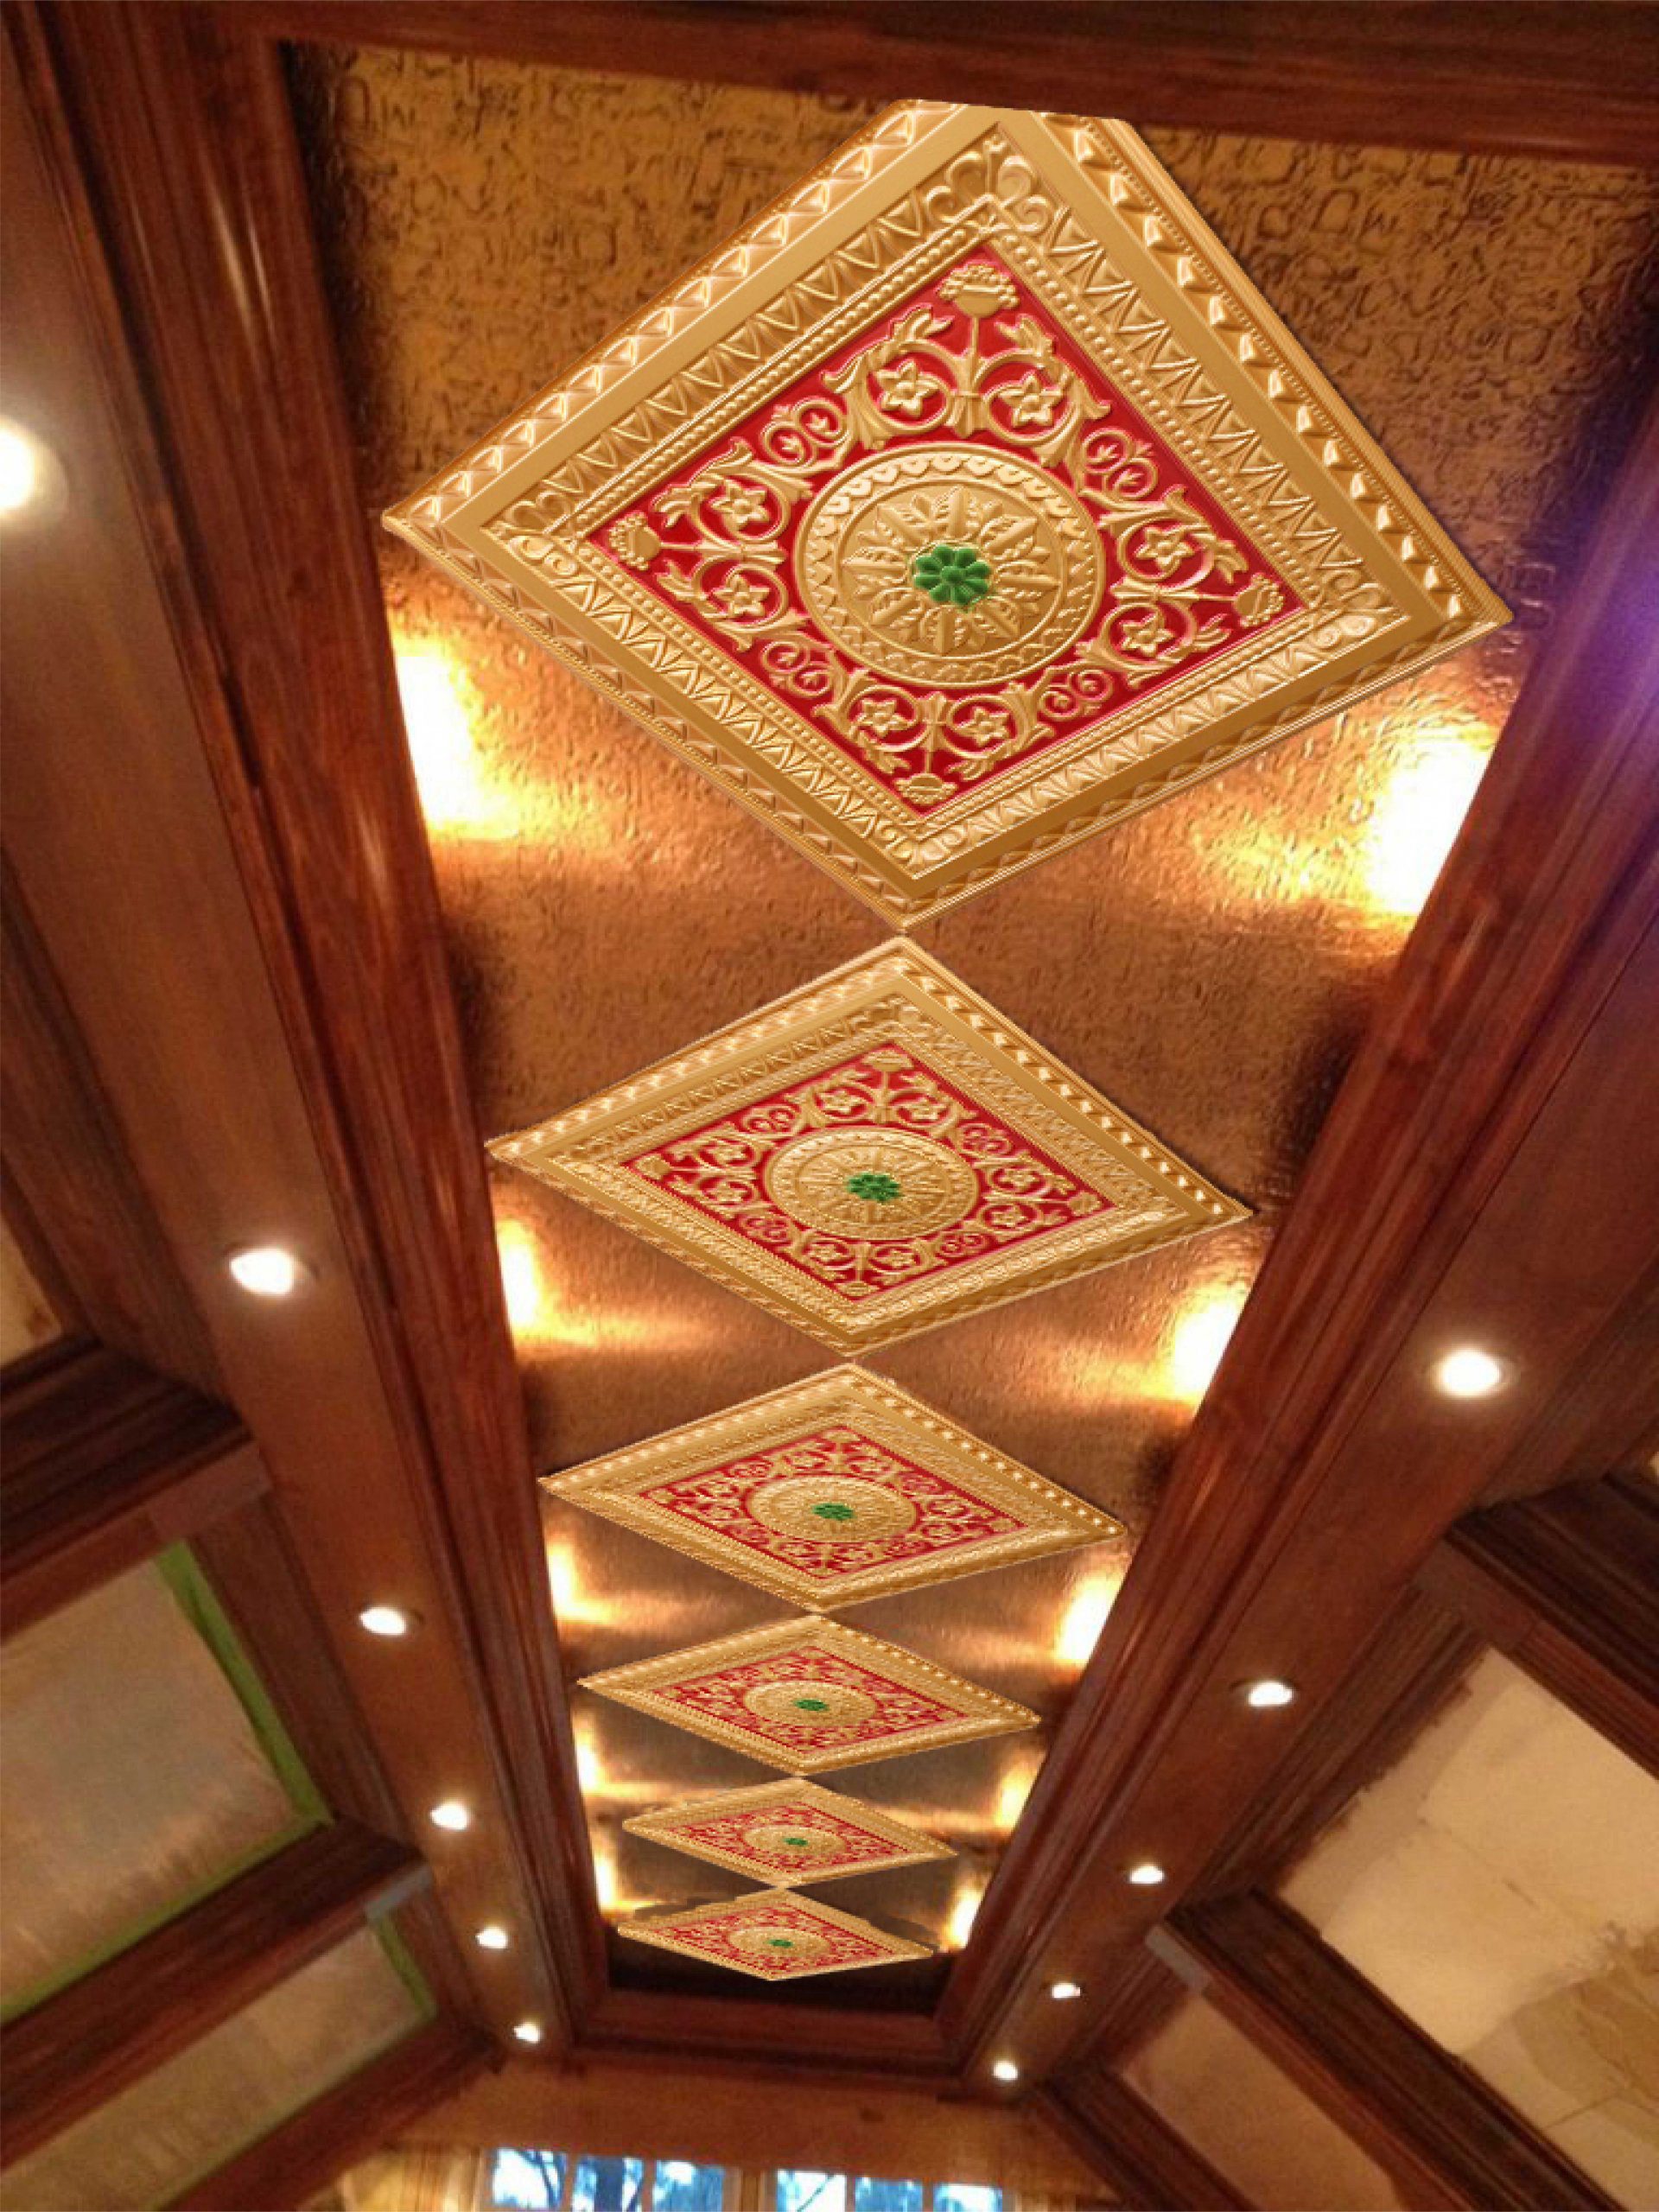 Green Glue added to a ceiling